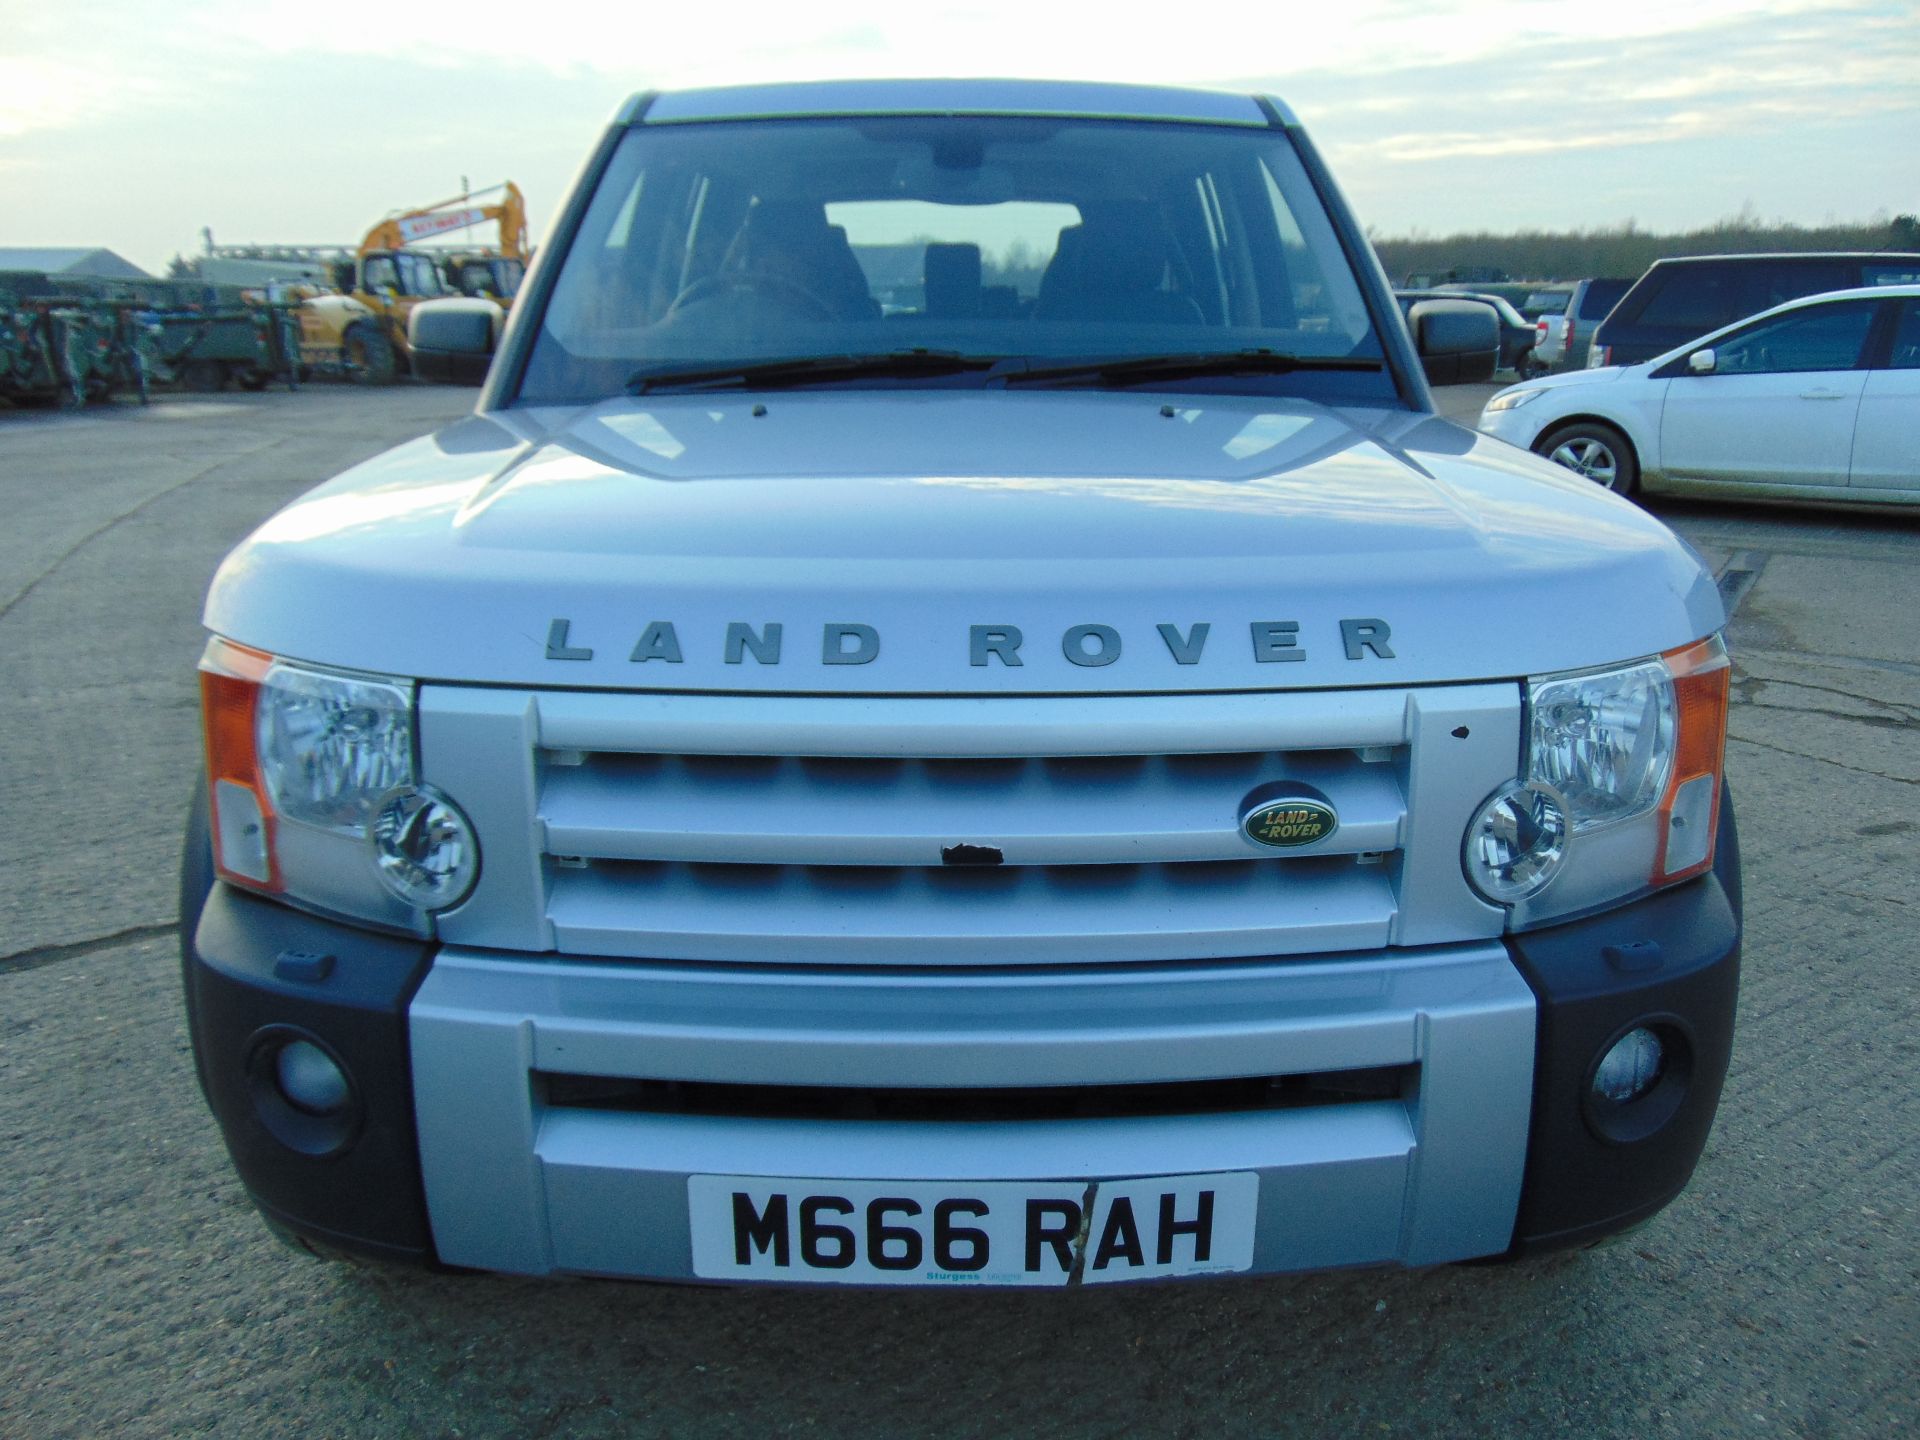 2006 Land Rover Discovery 3 2.7 TDV6 S Auto - Image 3 of 21